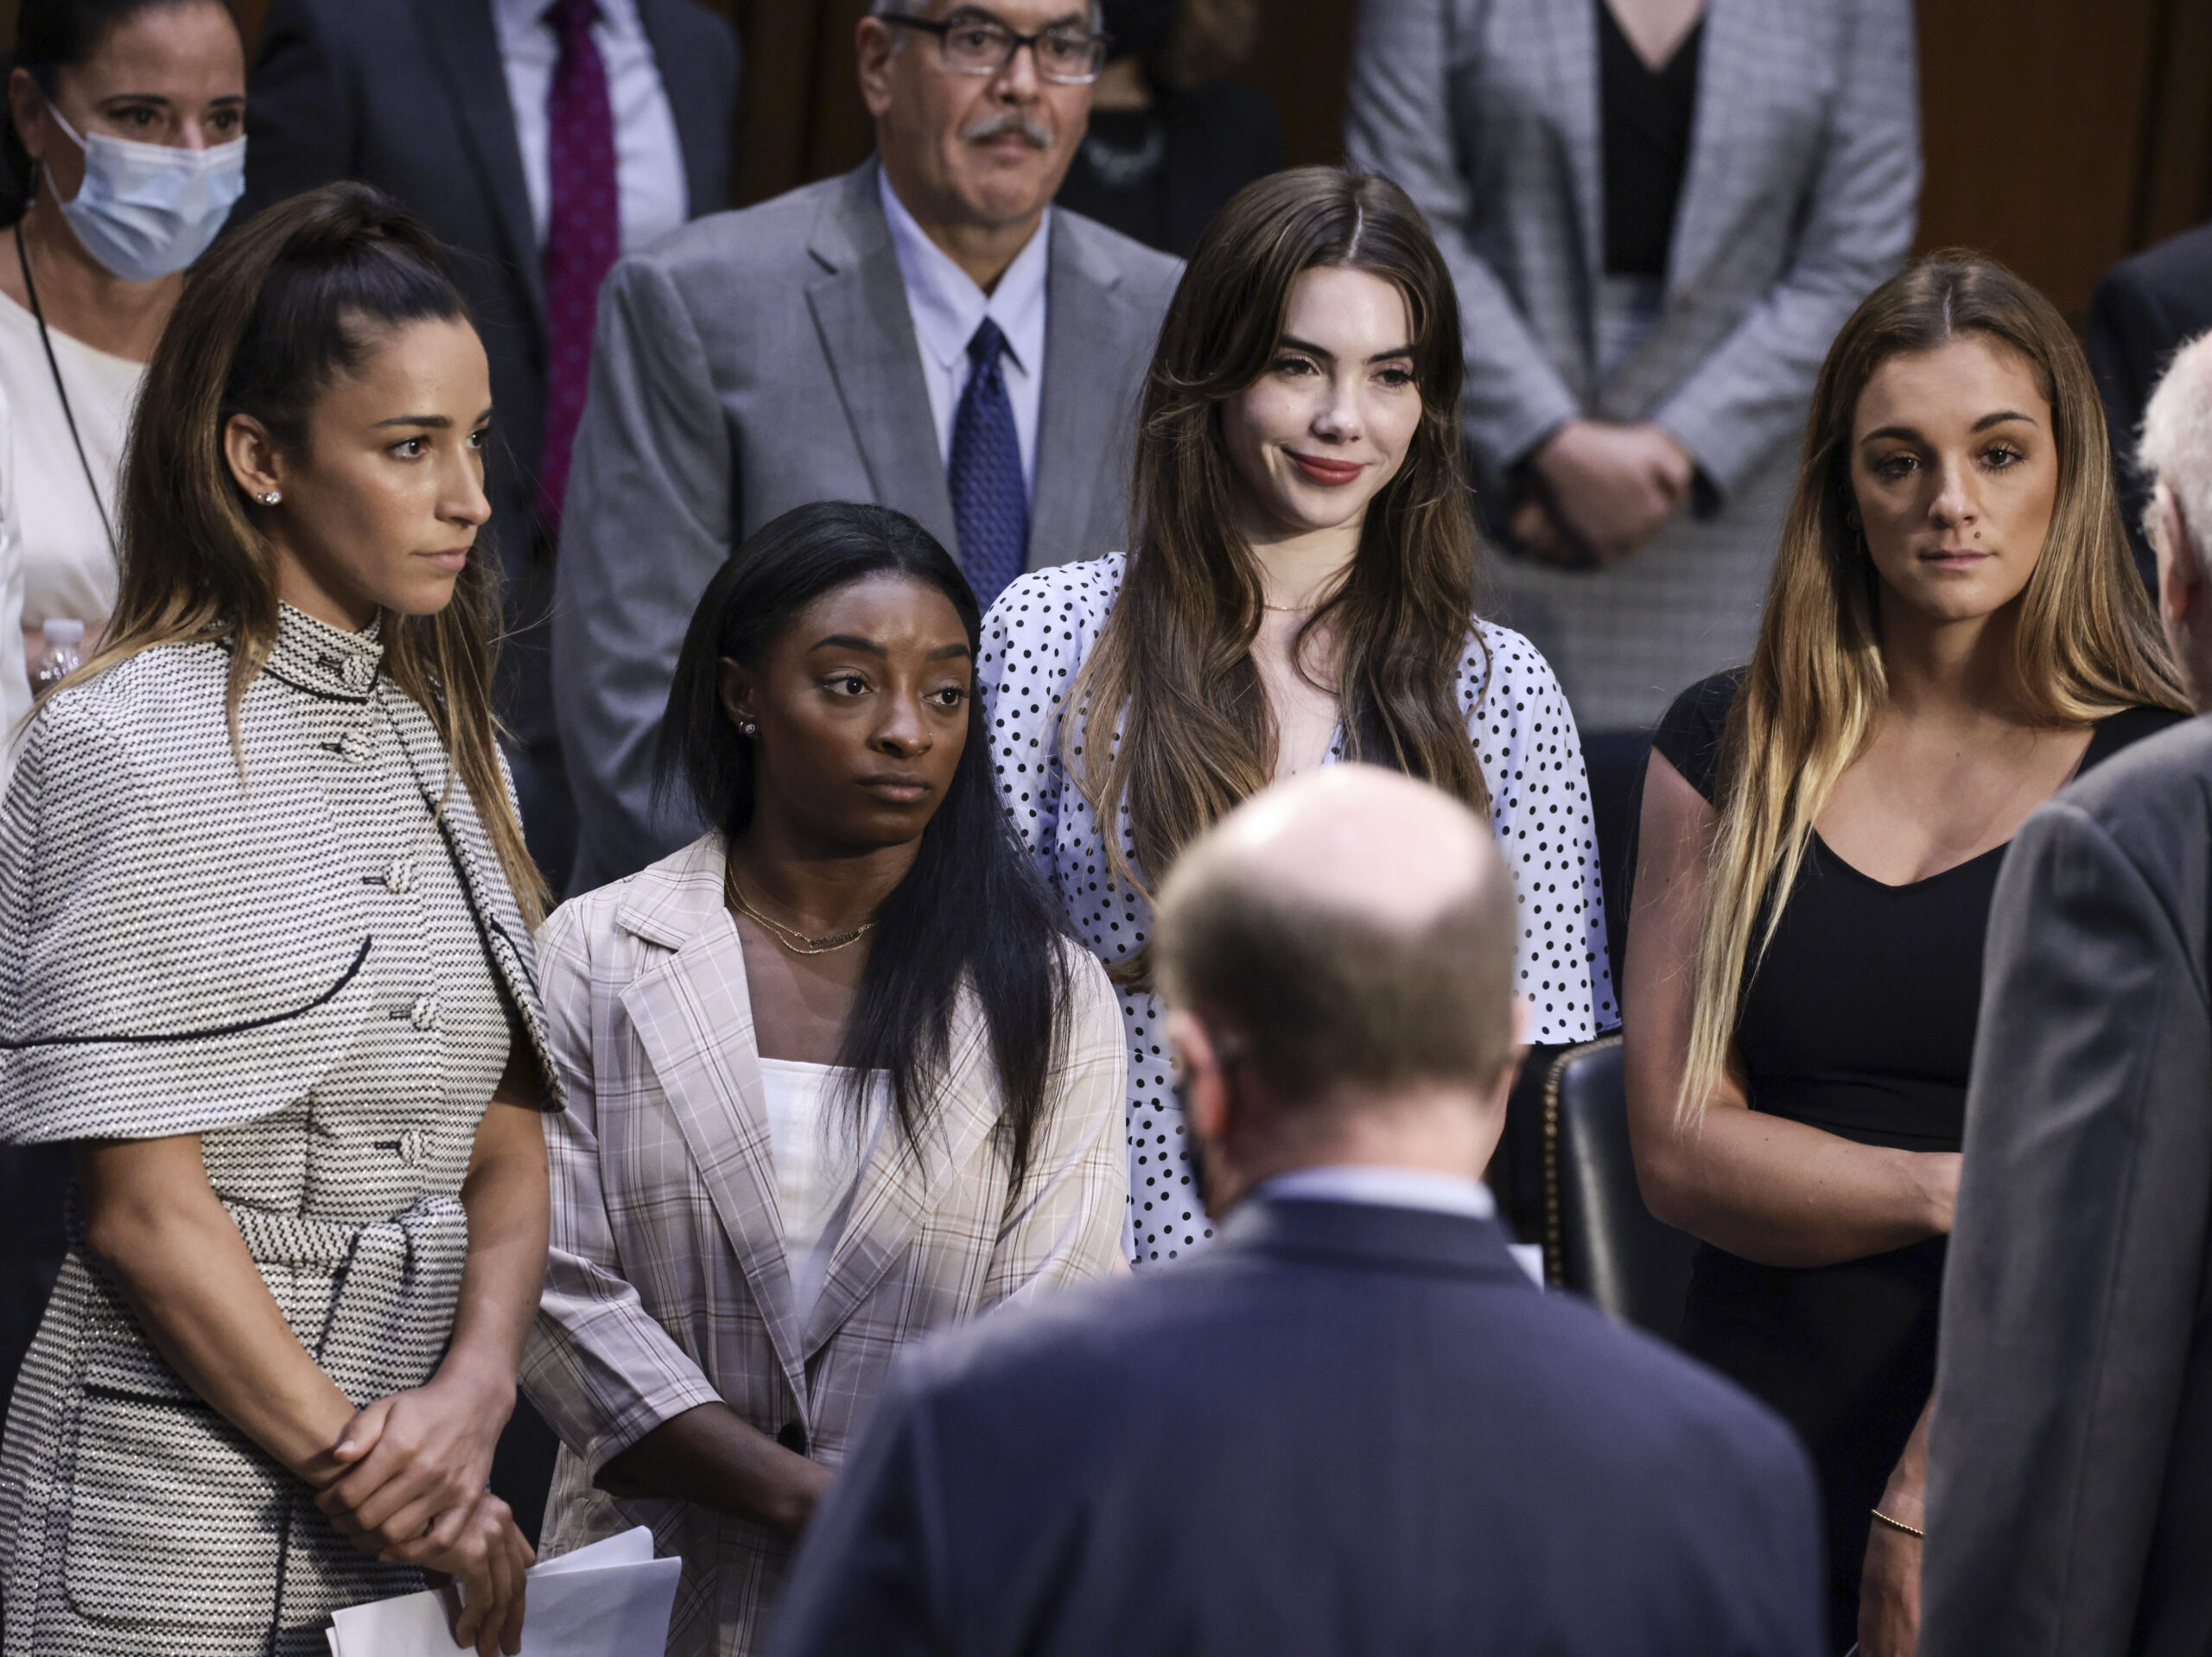 U.S. Olympic Gymnasts Aly Raisman, Simone Biles, McKayla Maroney and NCAA and world champion gymnast Maggie Nichols testified on Capitol Hill in 2021 about the Inspector General's report on the FBI handling of the Larry Nassar investigation of sexual abuse of Olympic gymnasts.